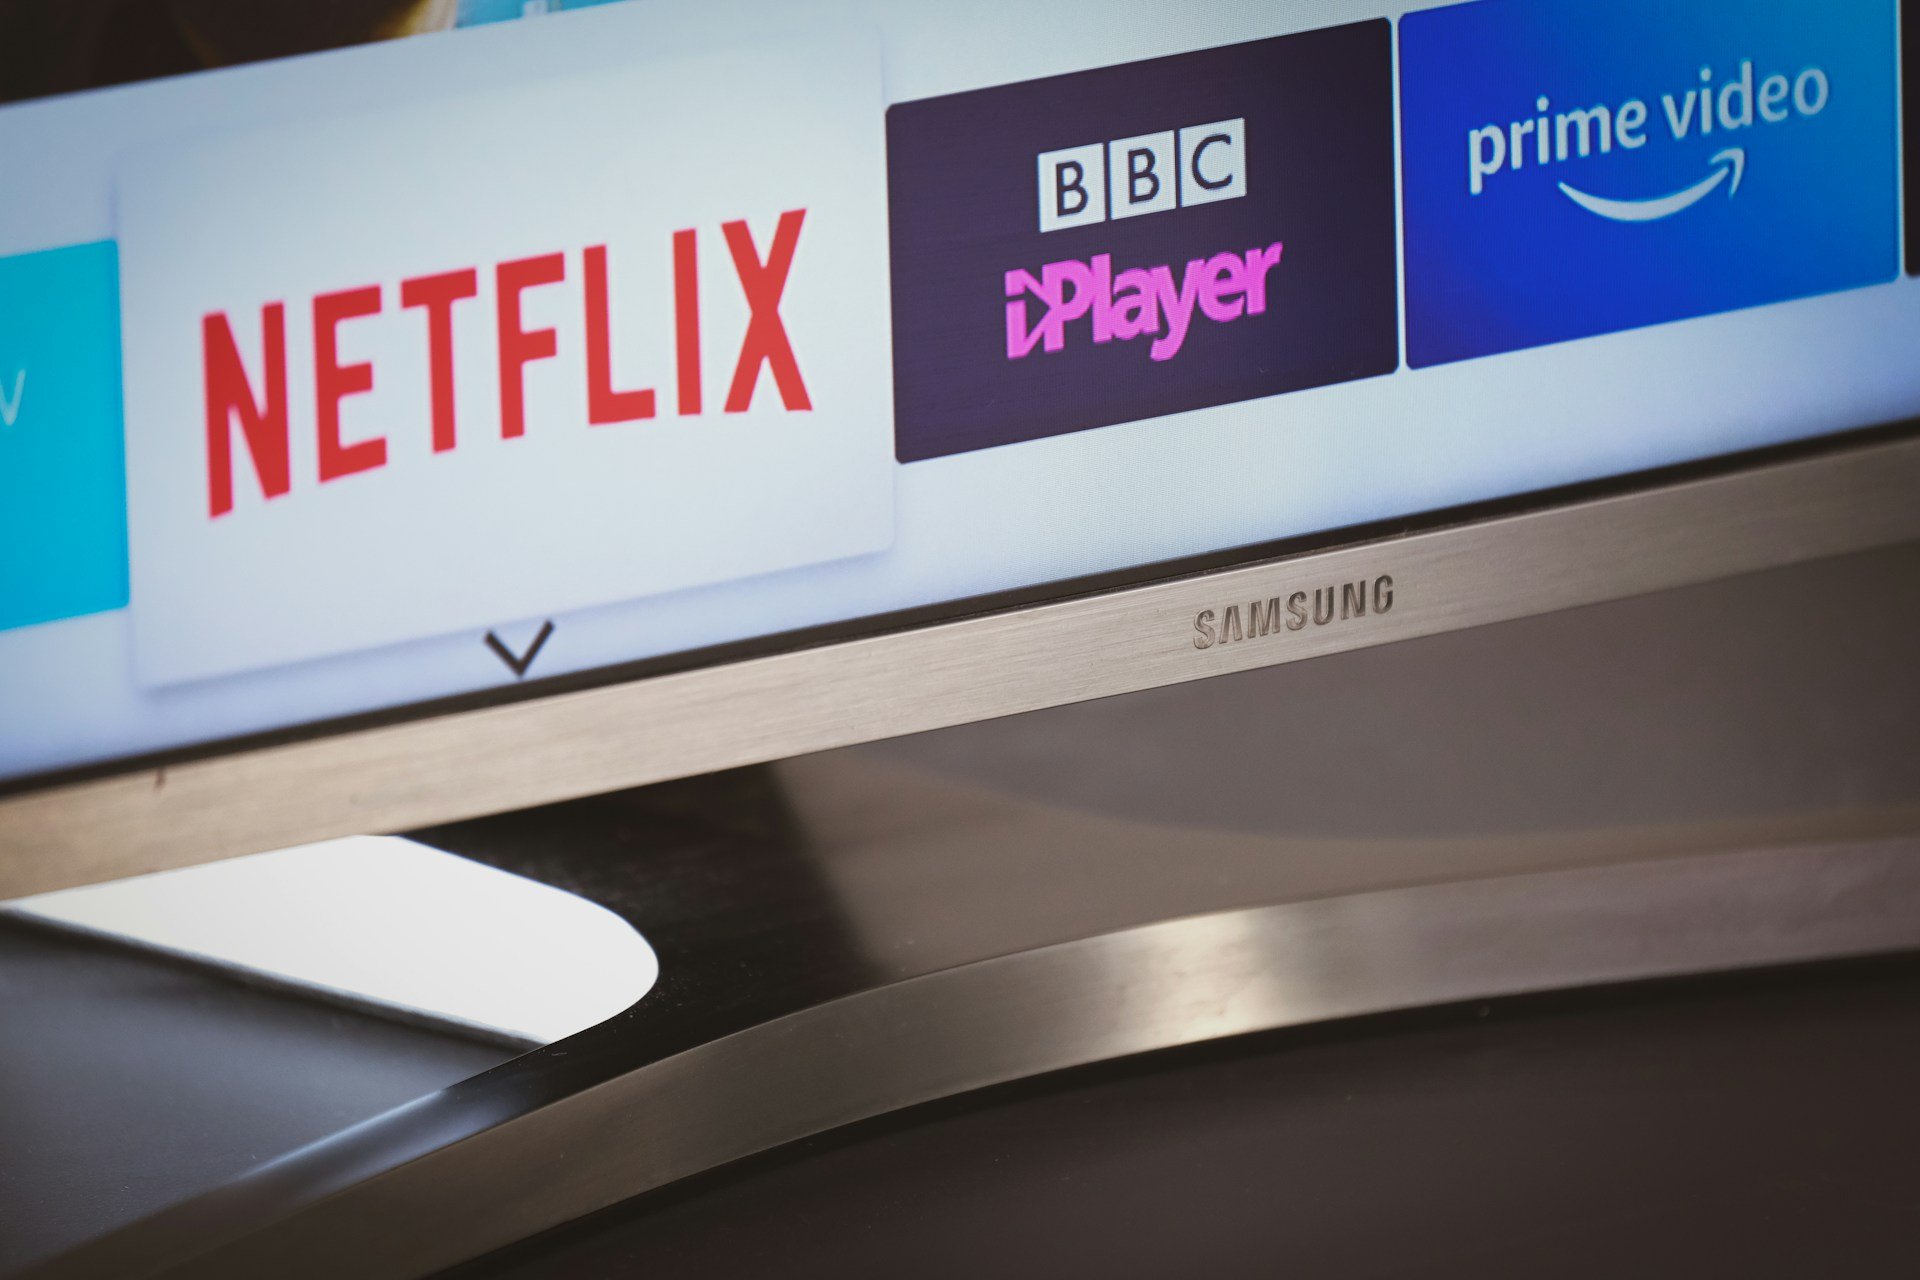 BBC iPlayer stops downloads on Windows and Mac, faces backlash